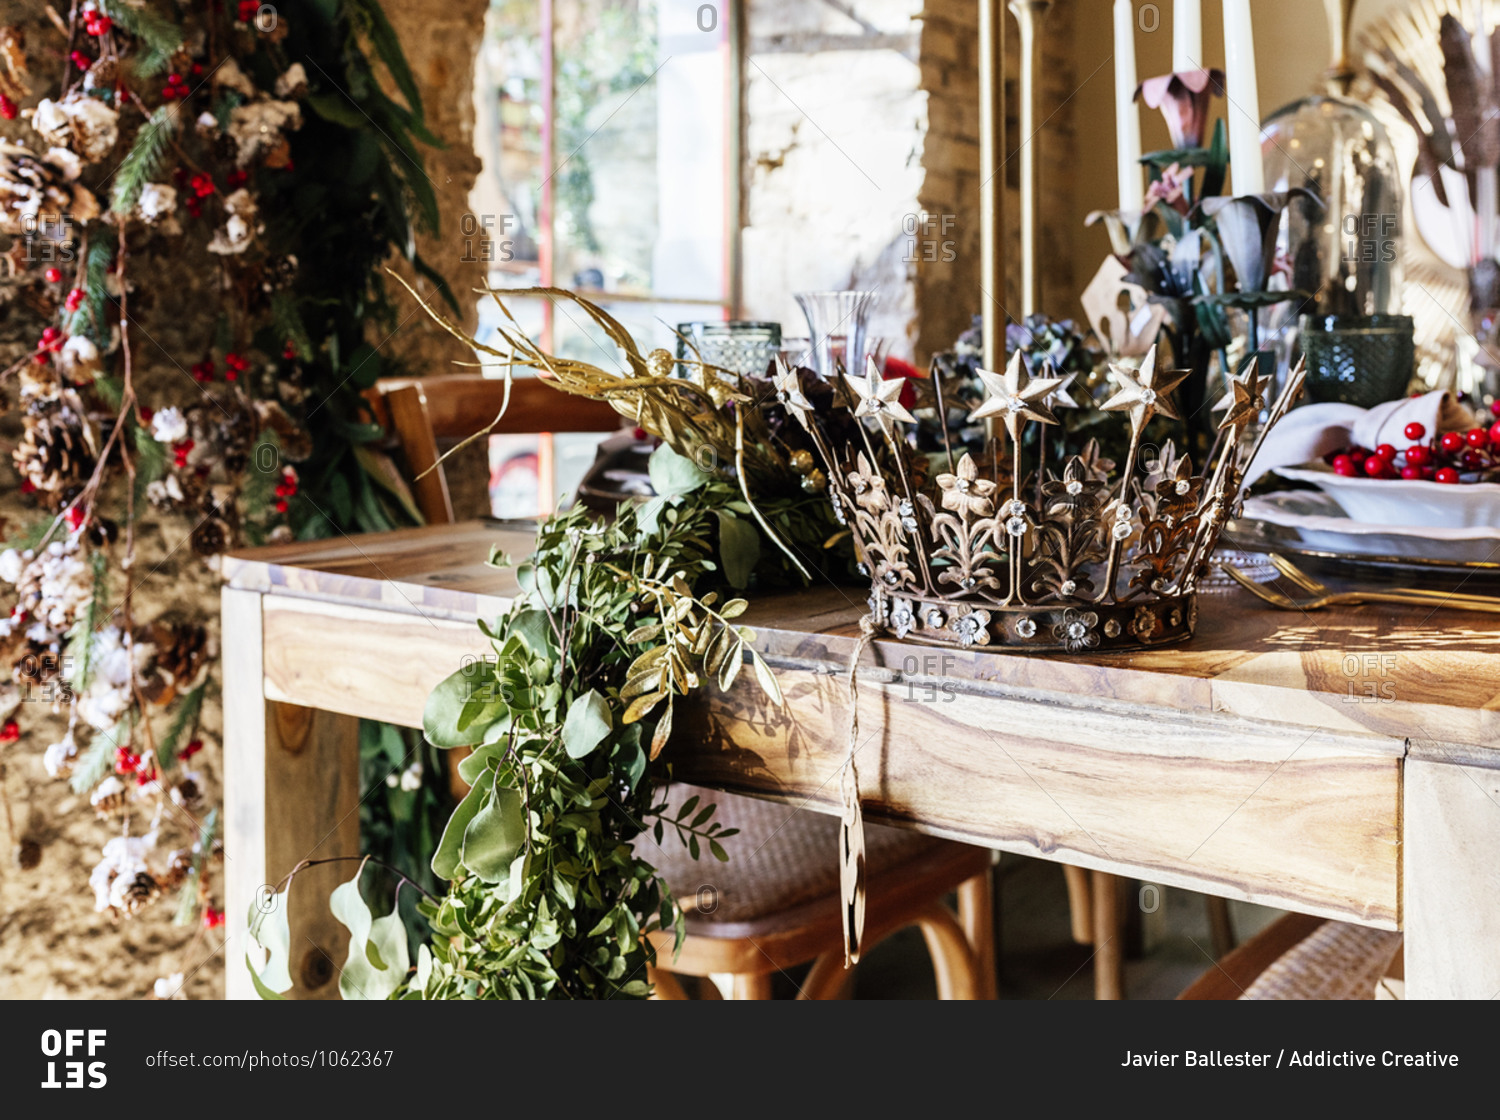 Decorative vintage crown and leaves on wooden table in decor shop during Christmas season